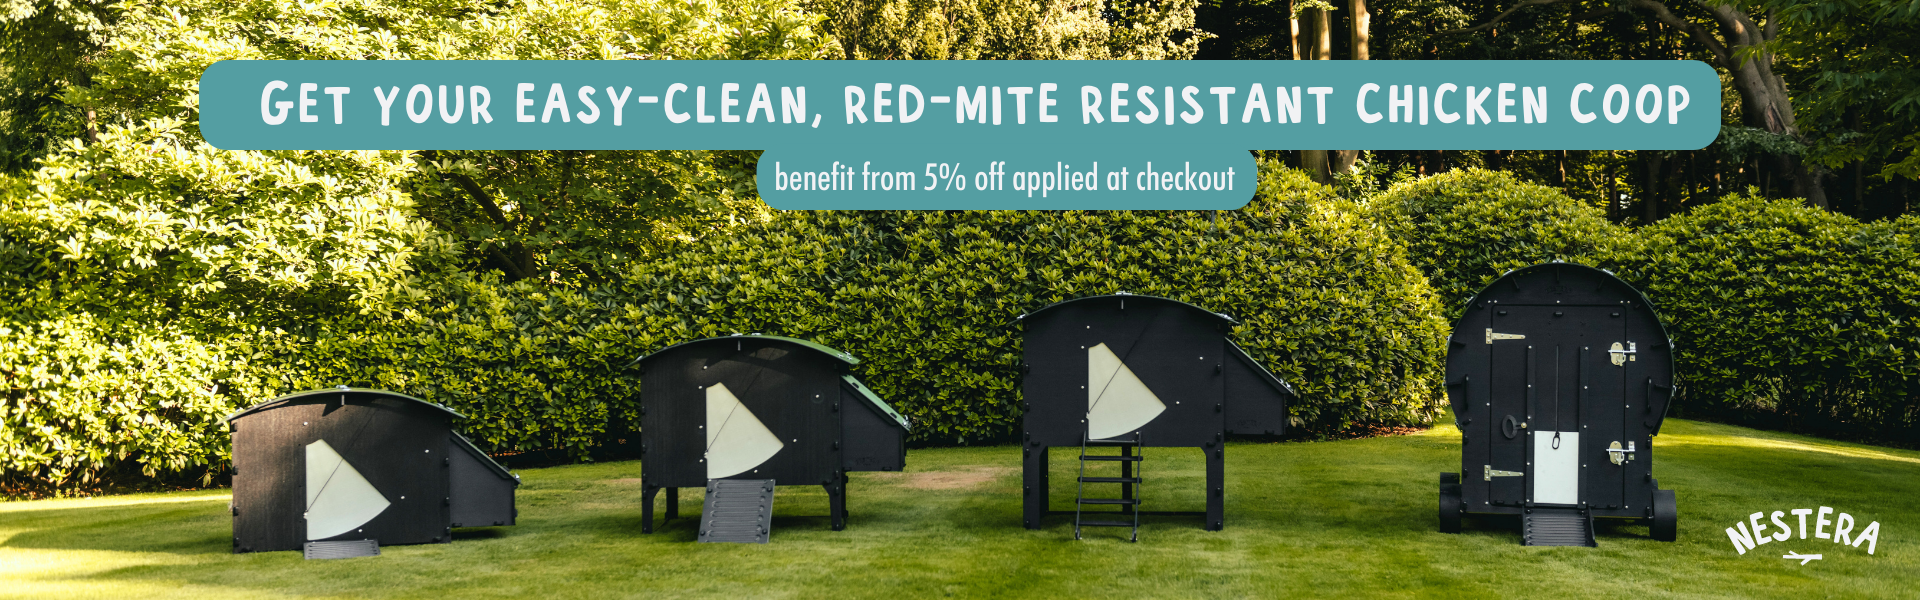 Get your easy-clean, red-mite resistant chicken coop